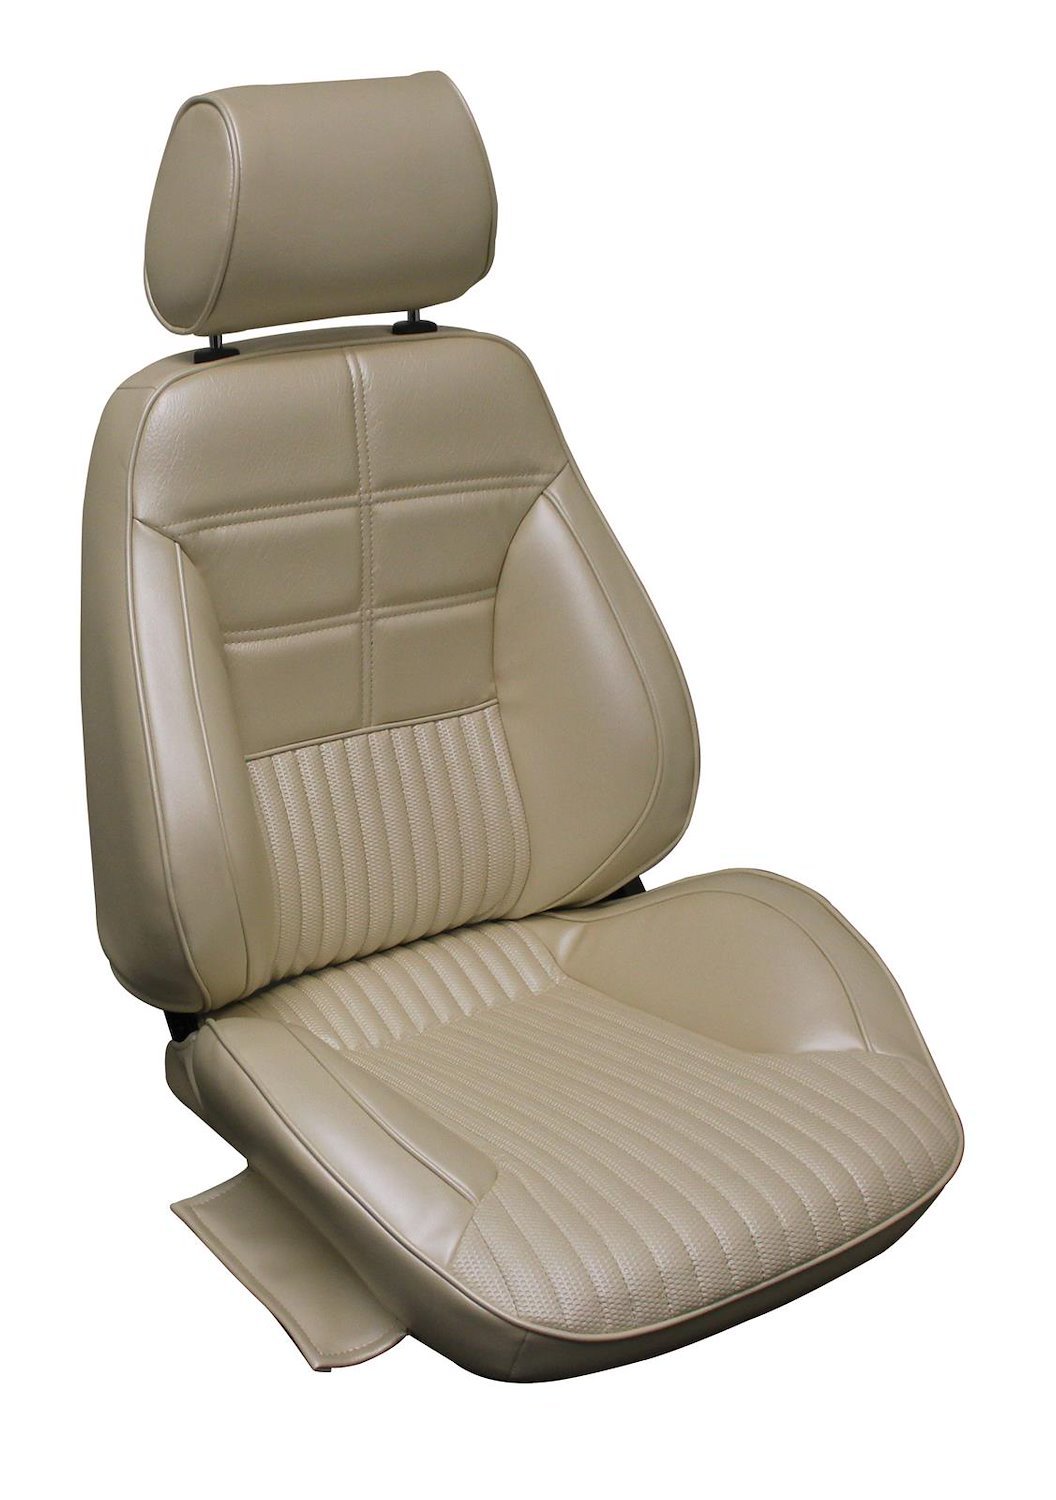 1970 Ford Mustang Deluxe and Grande Interior Black Touring II Preassembled Reclining Front Bucket Seats